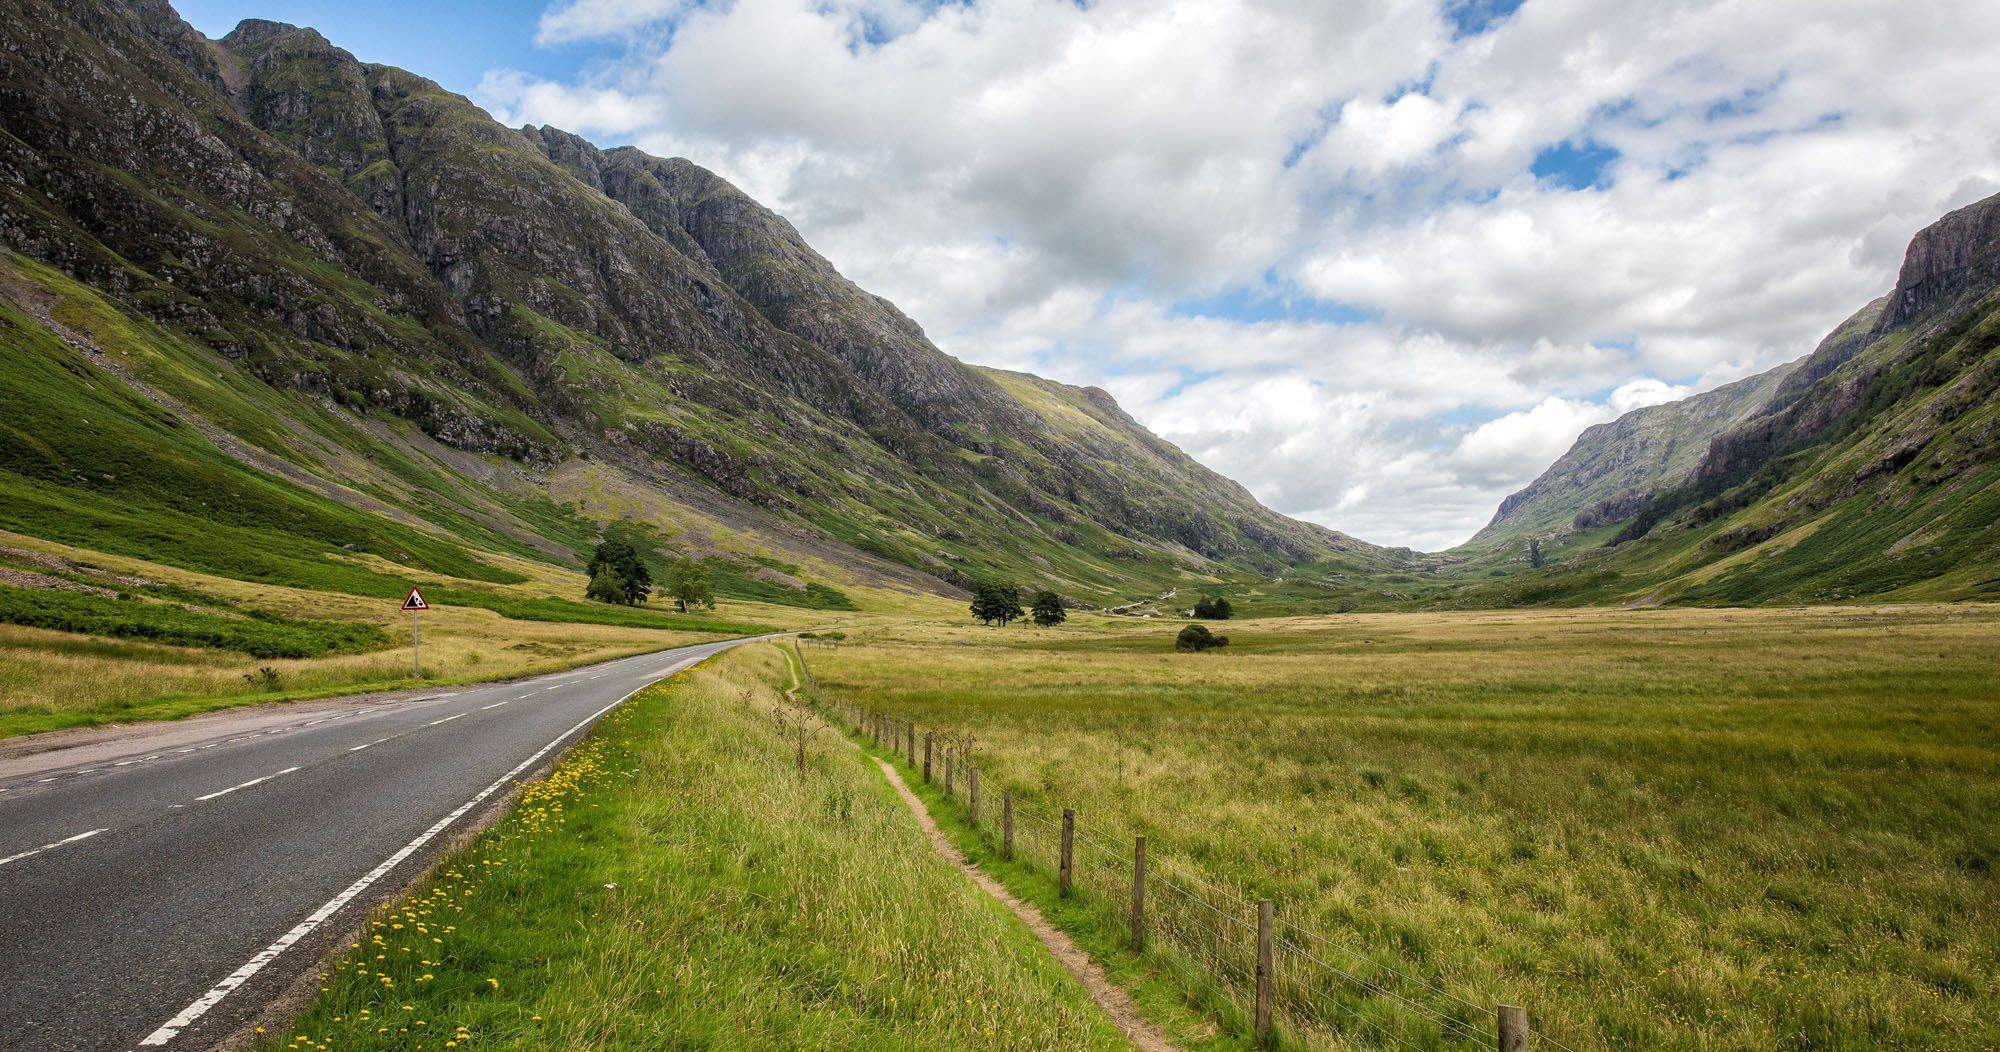 Featured image for “Driving to the Isle of Skye from Edinburgh or Glasgow”